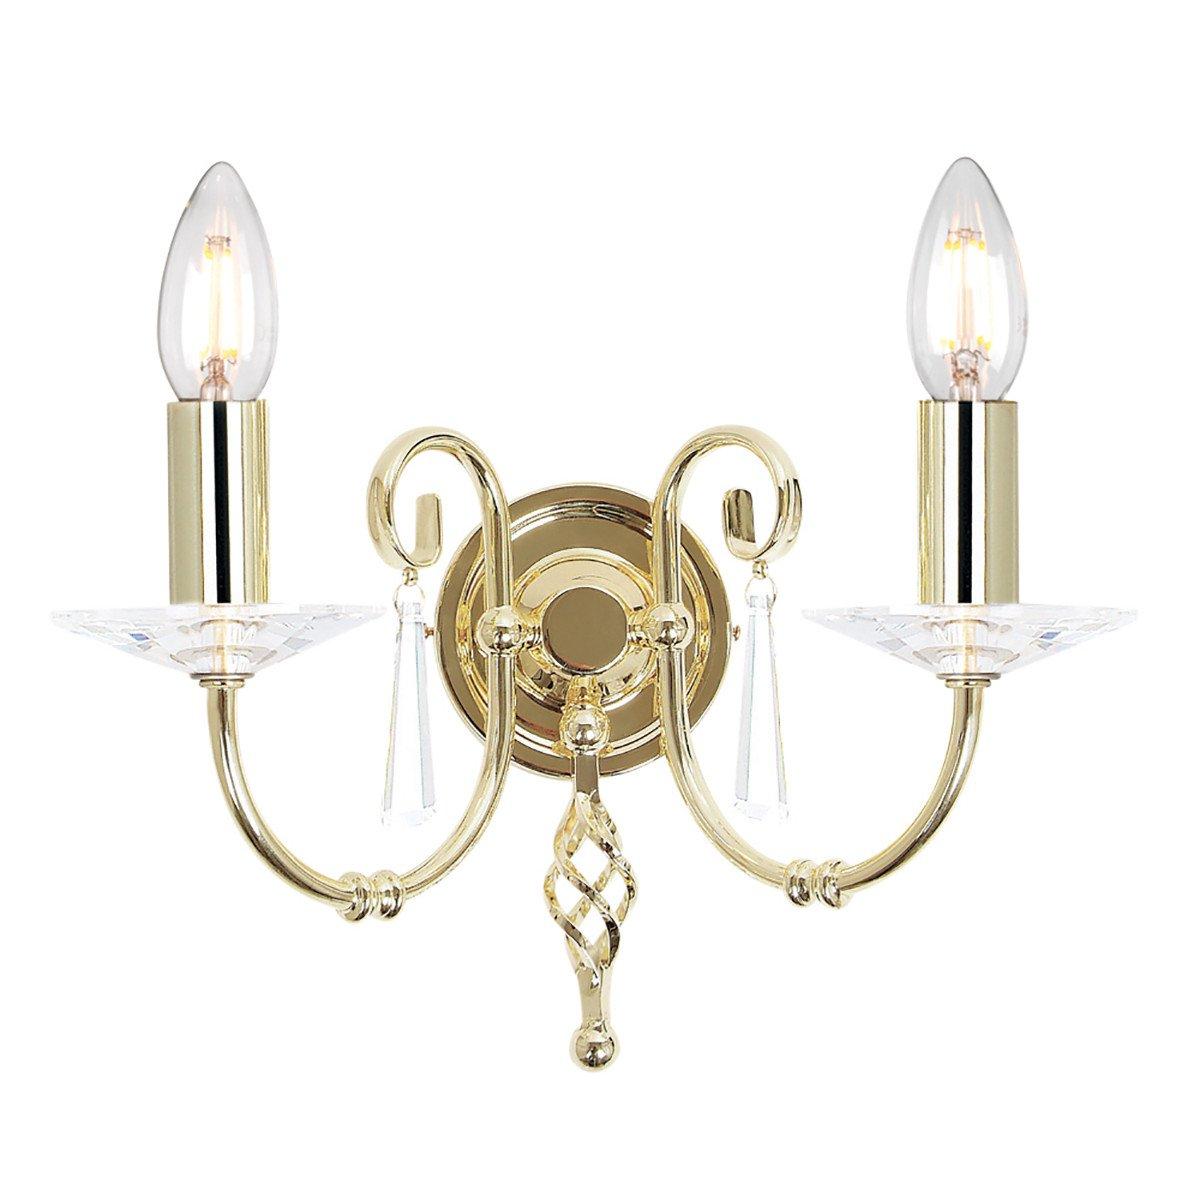 Aegean 2 Light Indoor Candle Wall Light Polished Brass E14